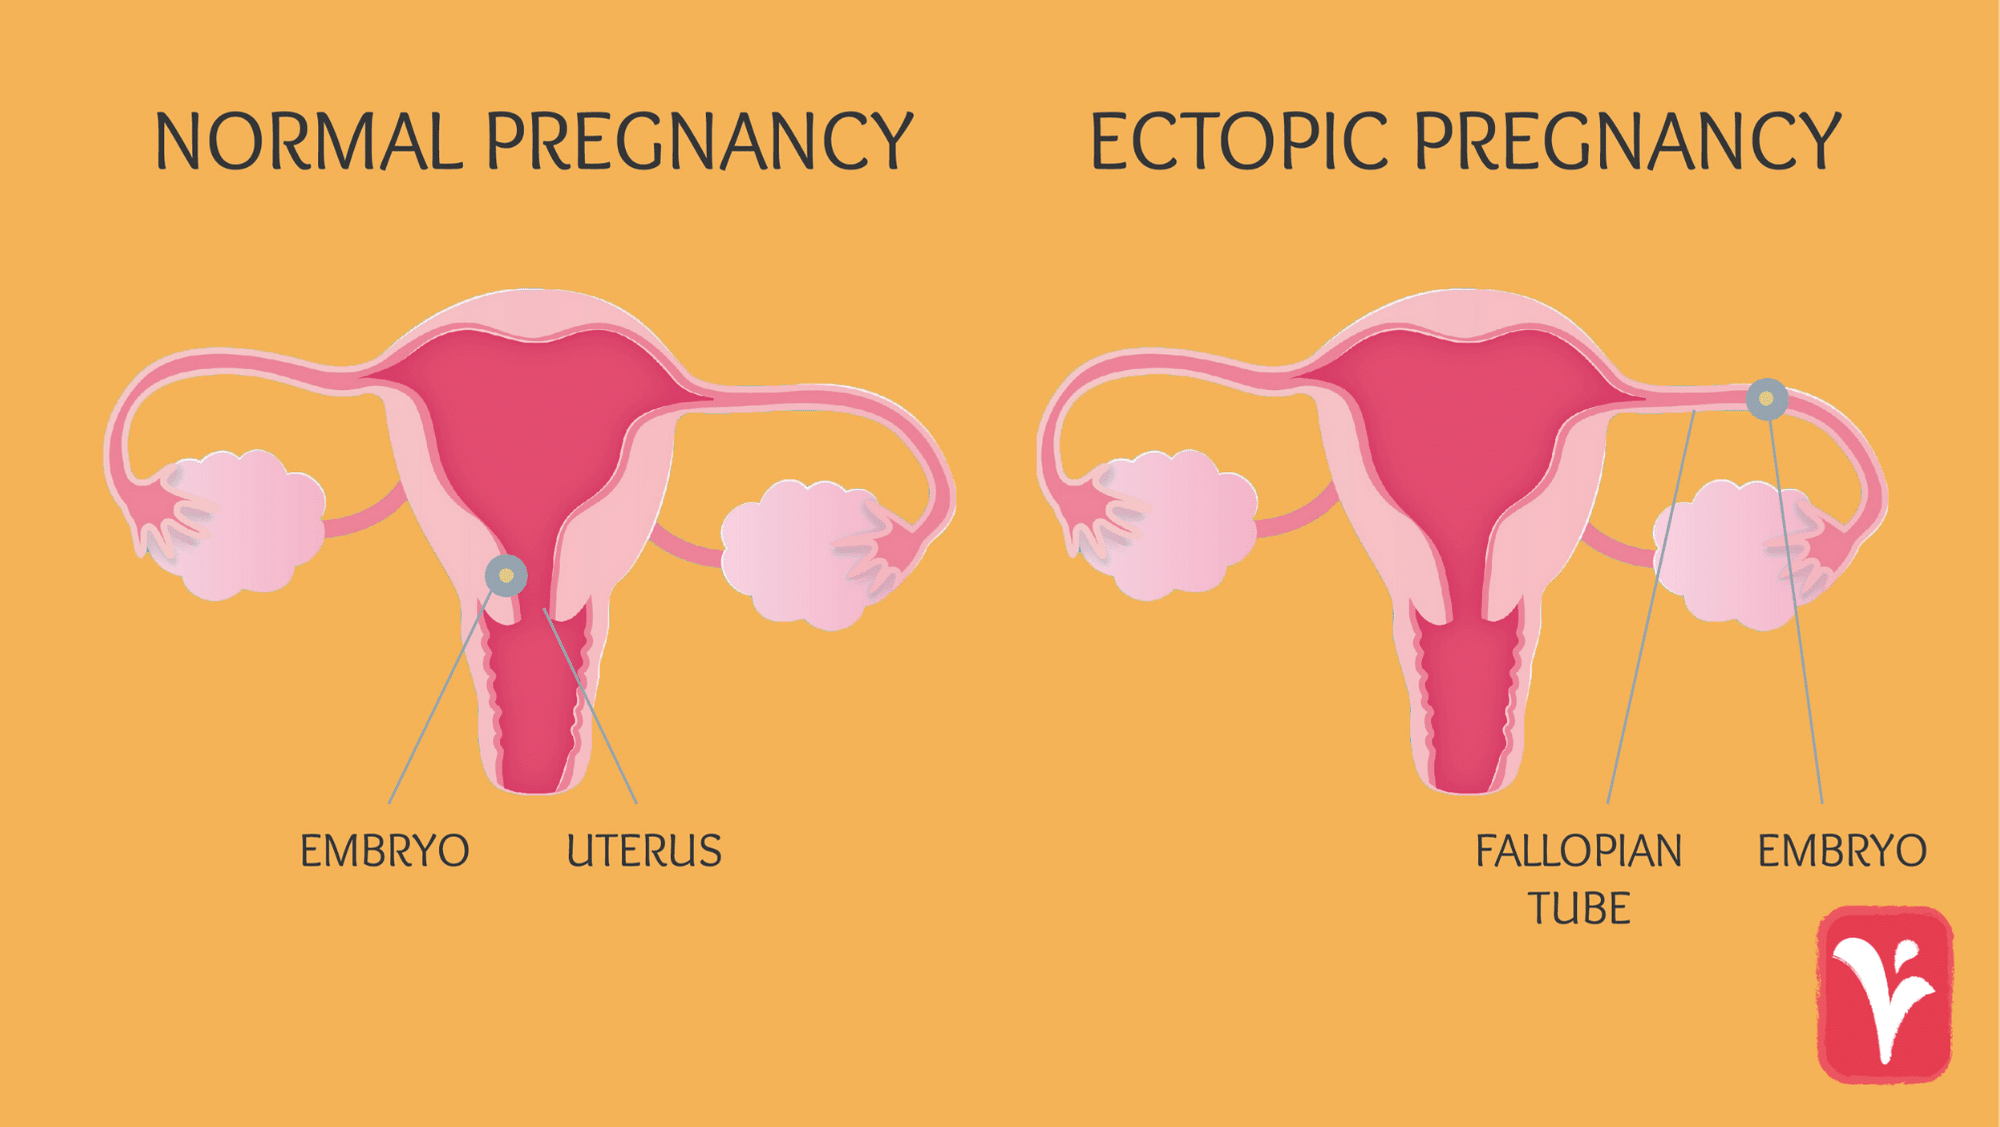 Ectopic Pregnancies: What You Need to Know - Austin Women's Health Center